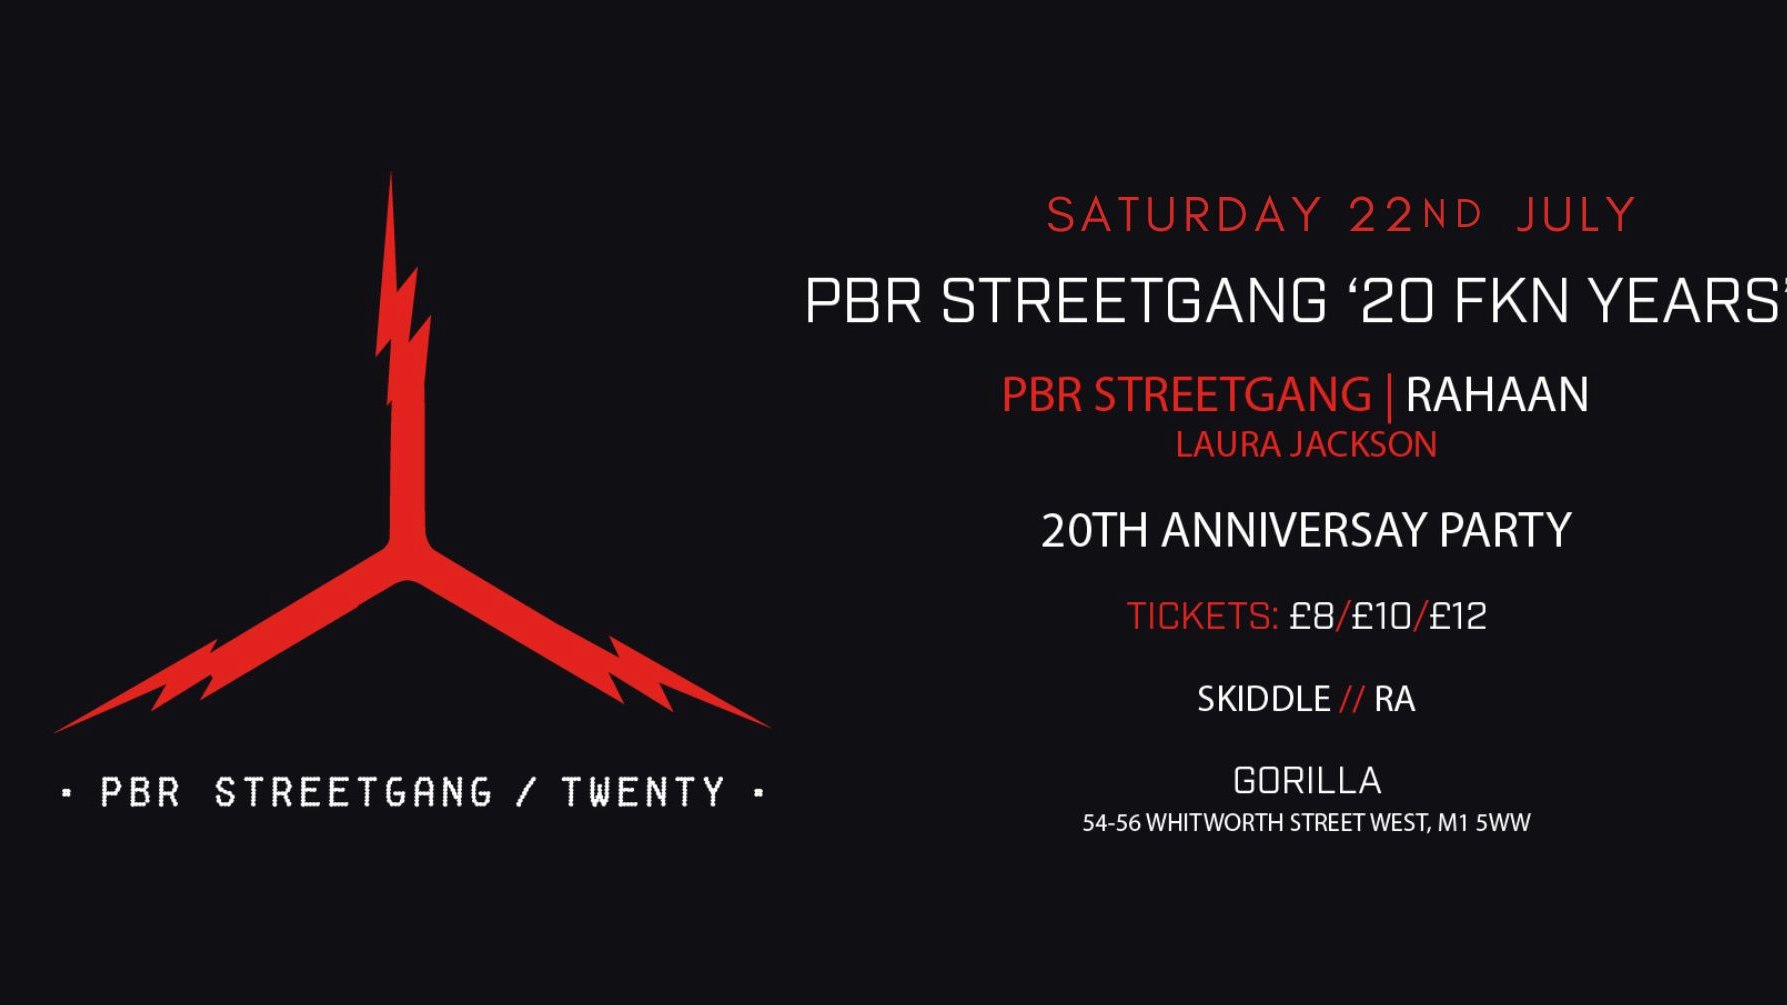 20 YEARS OF PBR STREETGANG